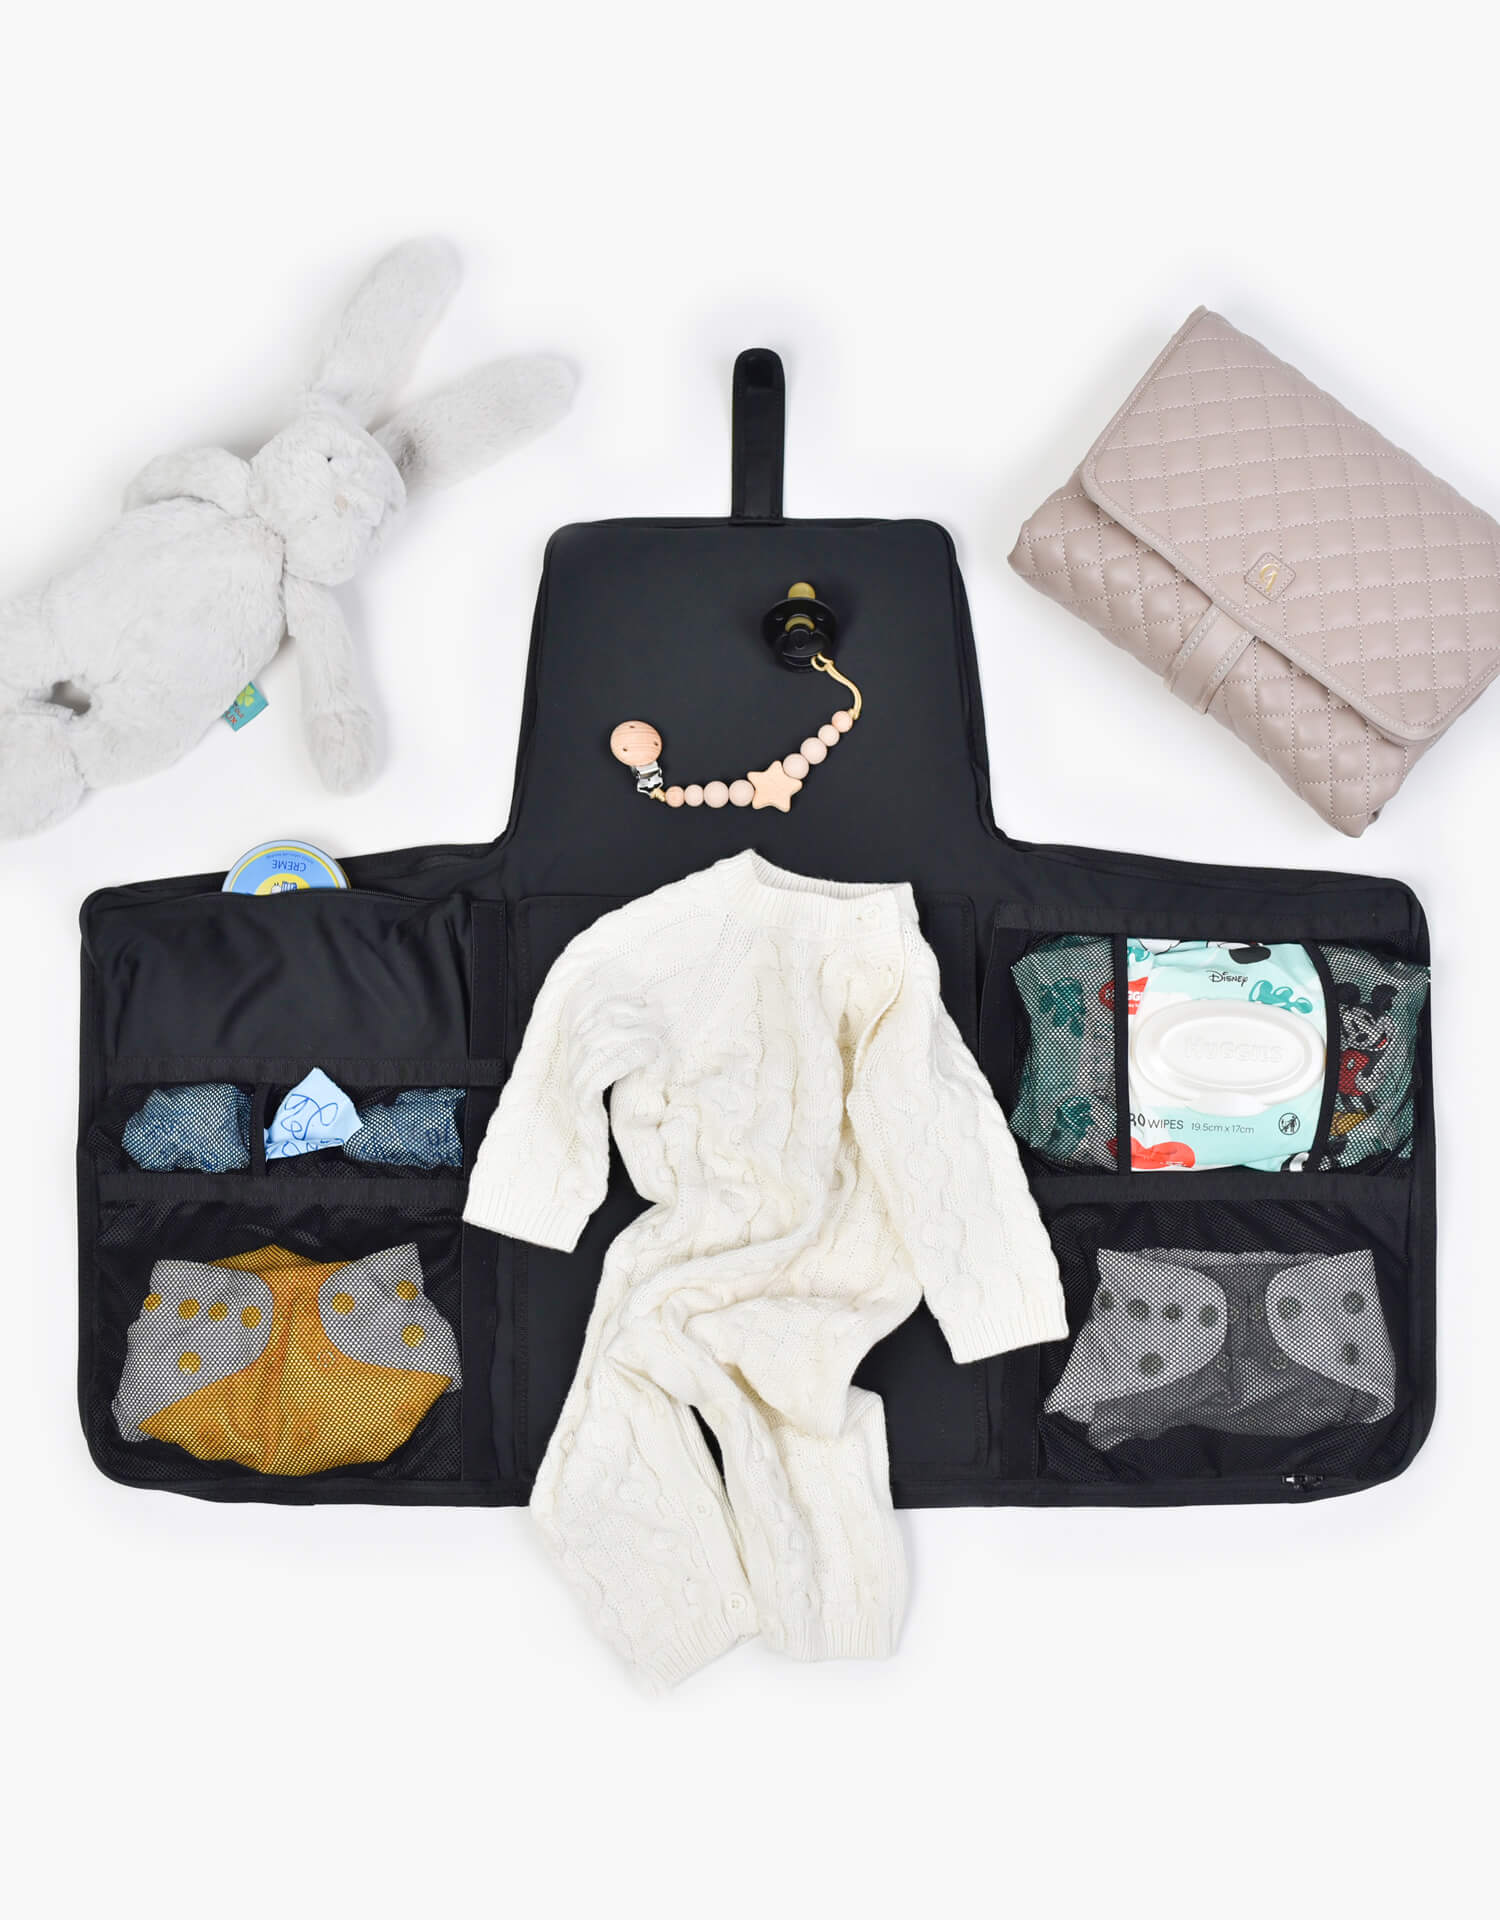 Diaper bag opened as baby Changing Station